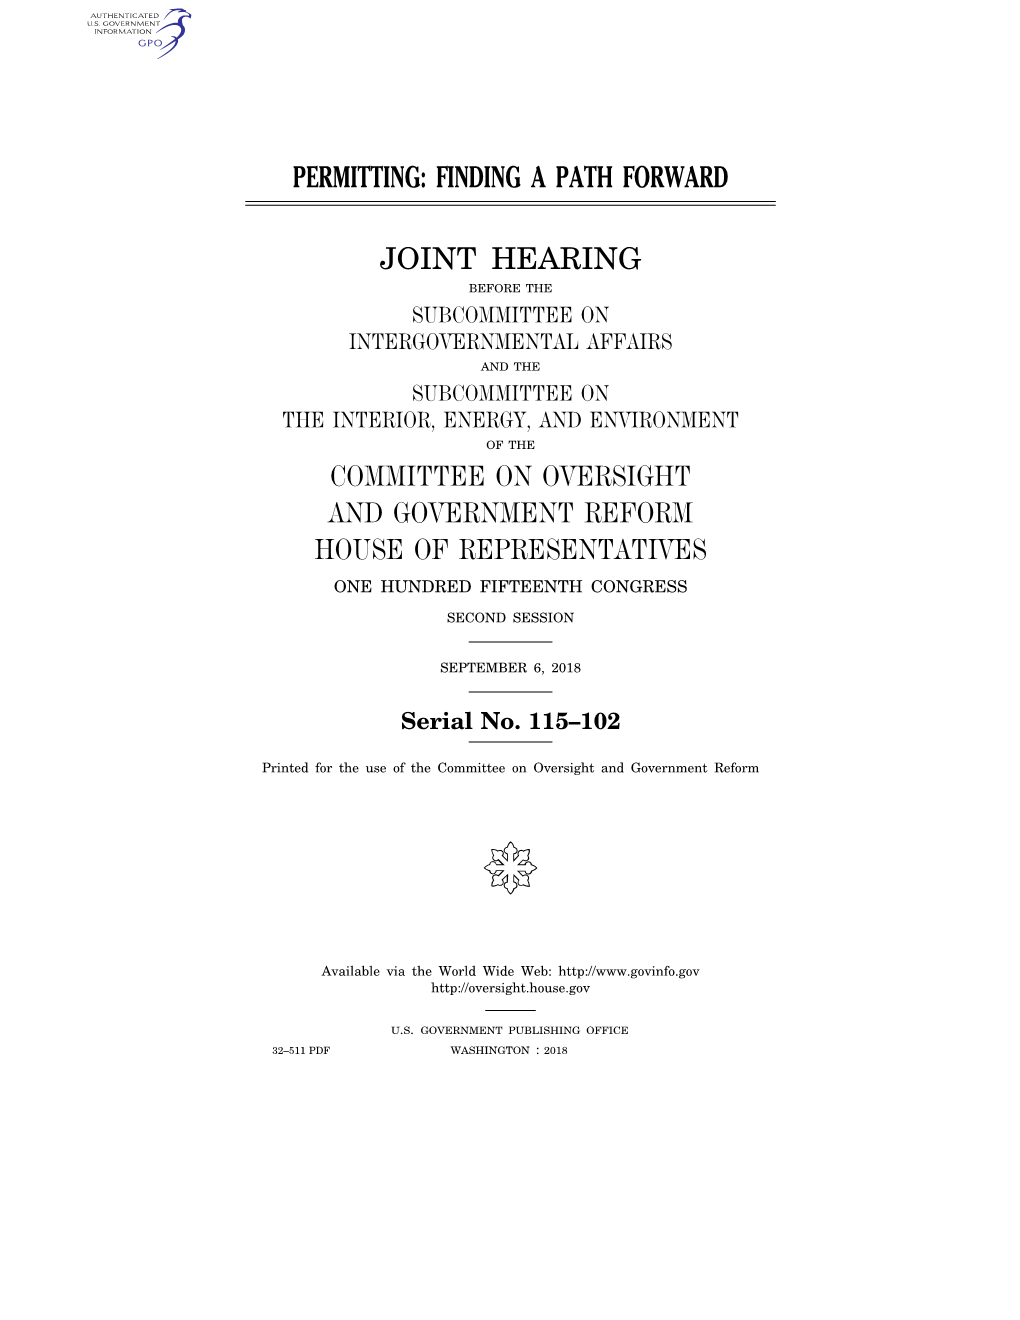 Permitting: Finding a Path Forward Joint Hearing Committee on Oversight and Government Reform House of Representatives